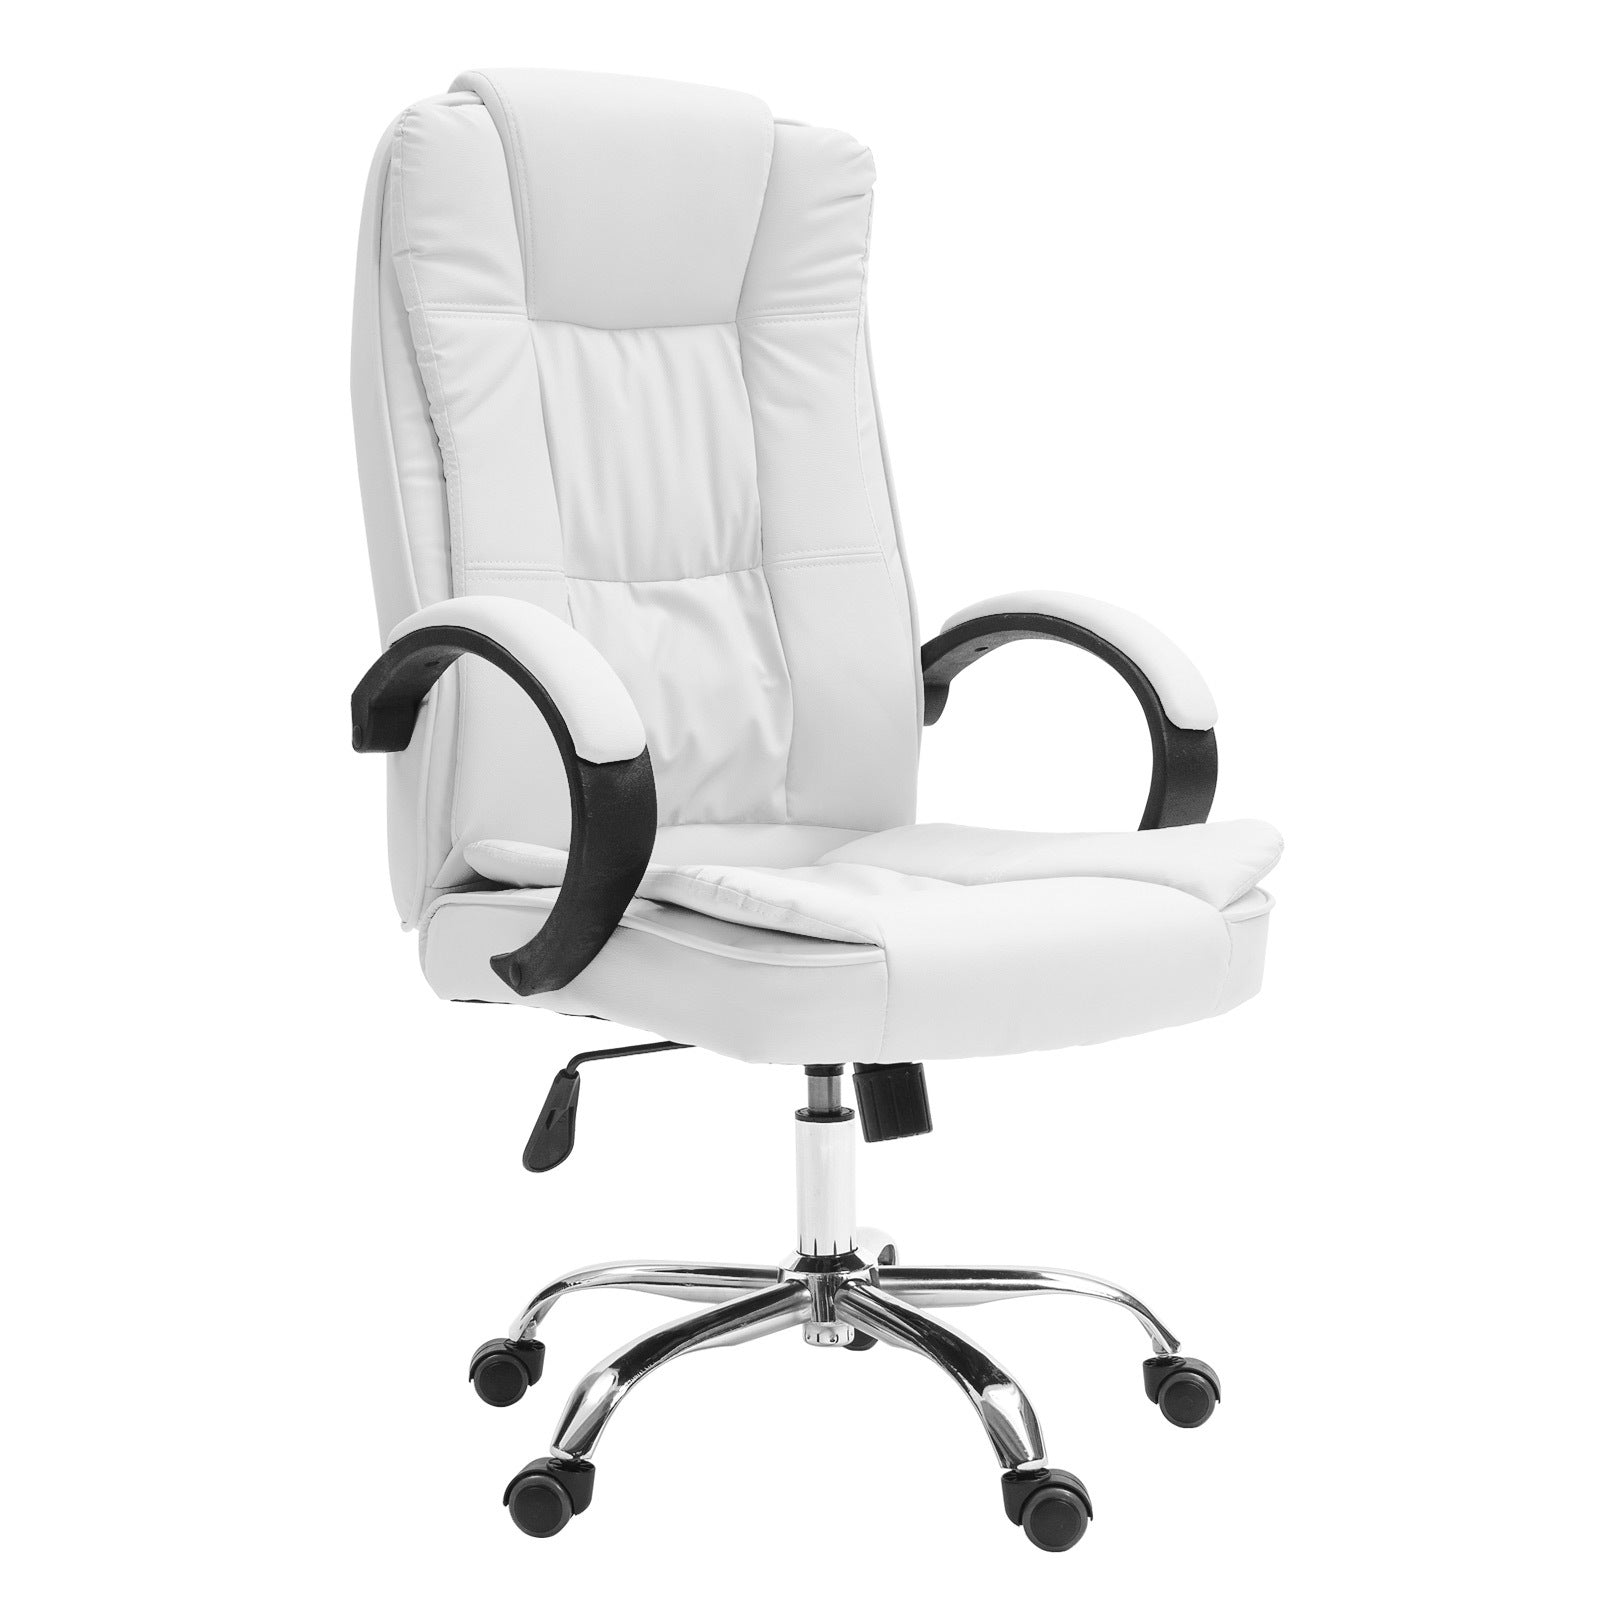 La Bella White Executive Office Chair Sage Dual-Layer Seat Fast shipping On sale